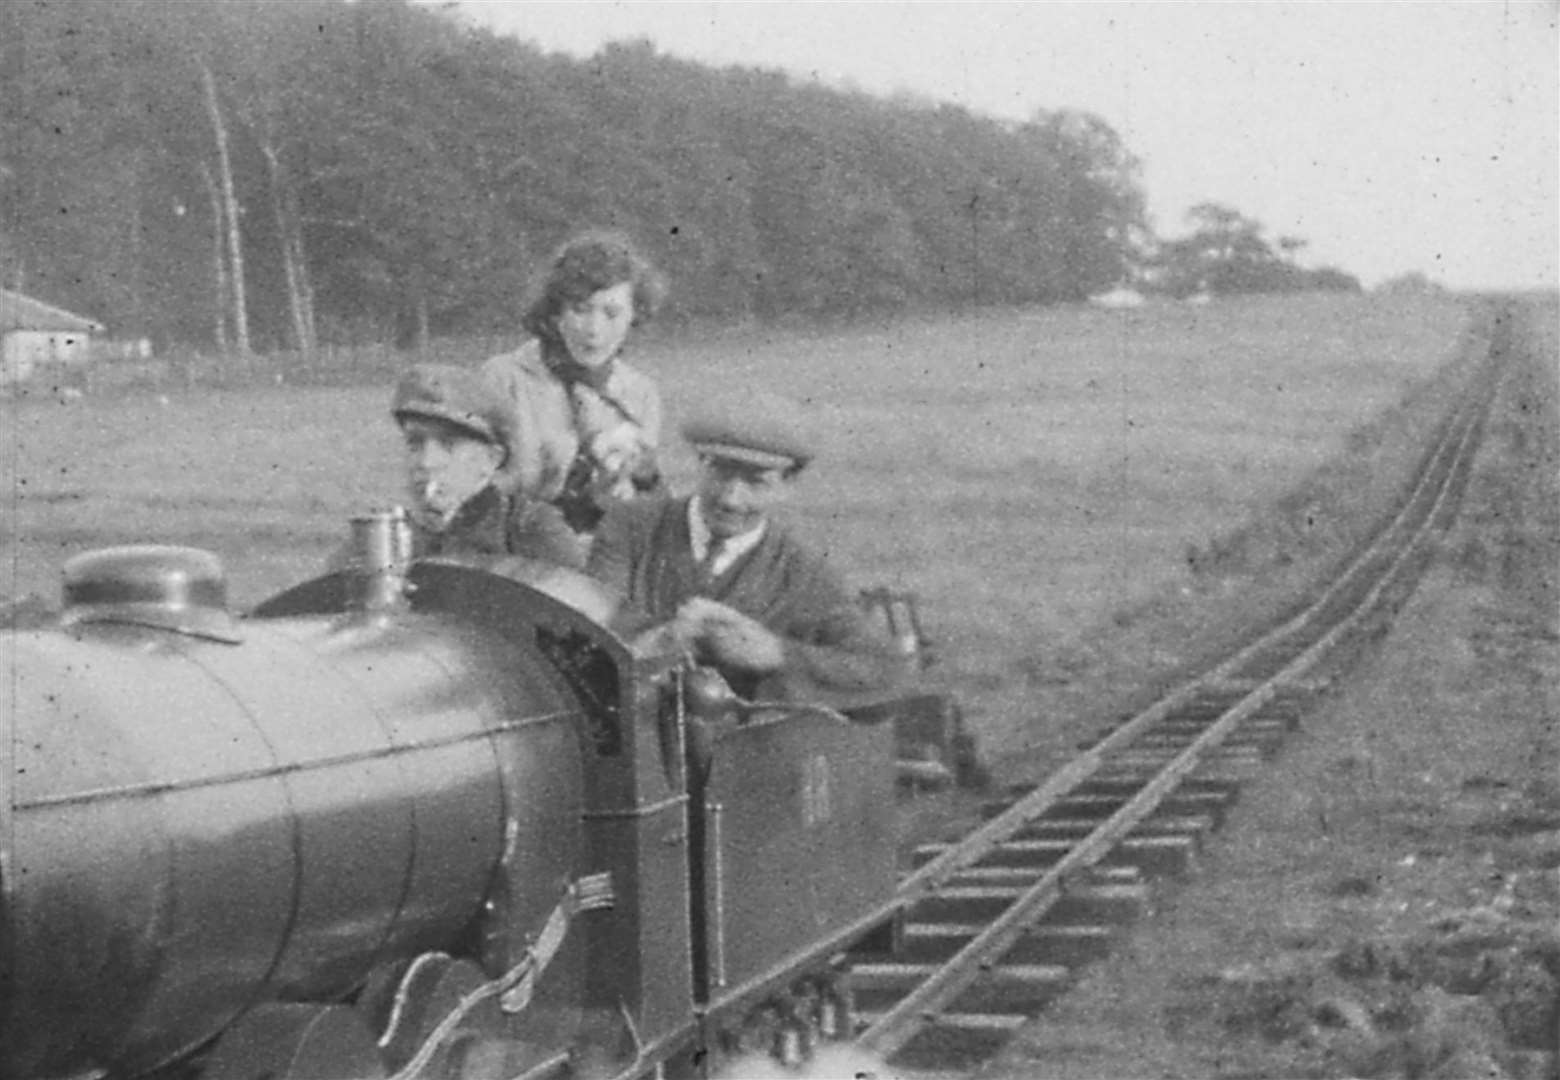 Count Zborowski (right) with Clive Gallop aboard a train on the mile-long track built around his Higham Park estate in Bridge.